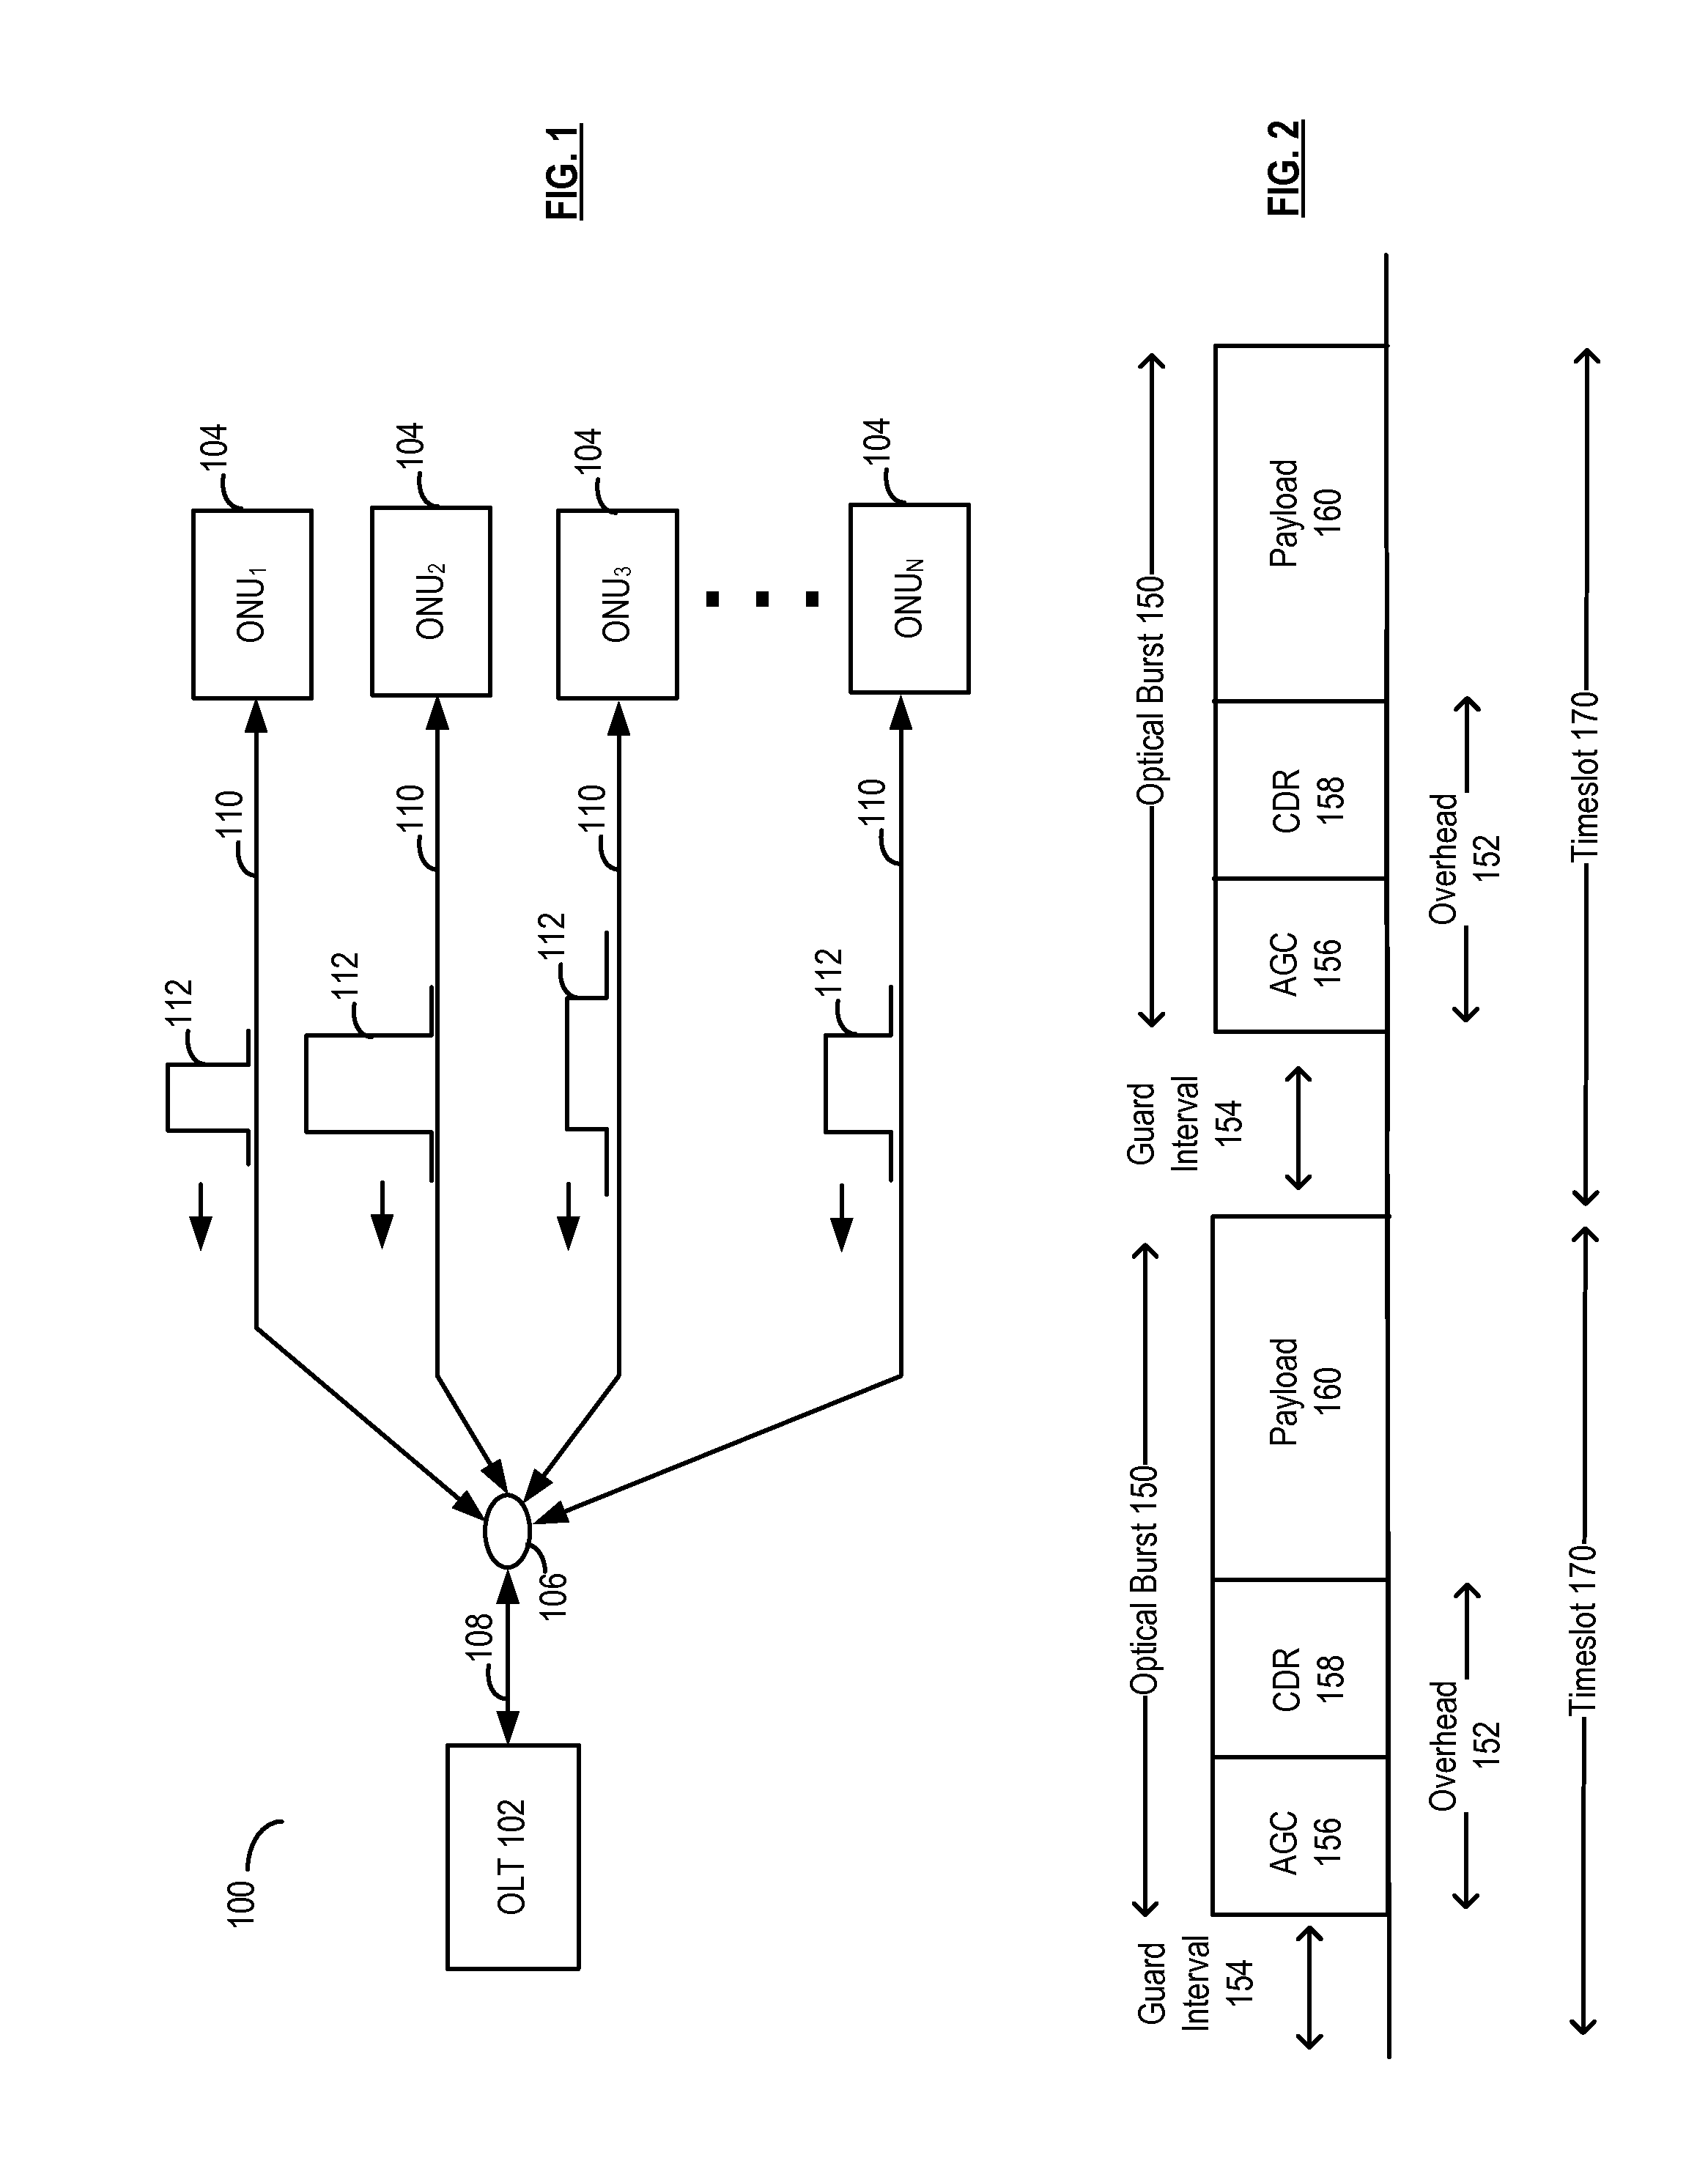 System and method for scheduling timeslots for transmission by optical nodes in an optical network